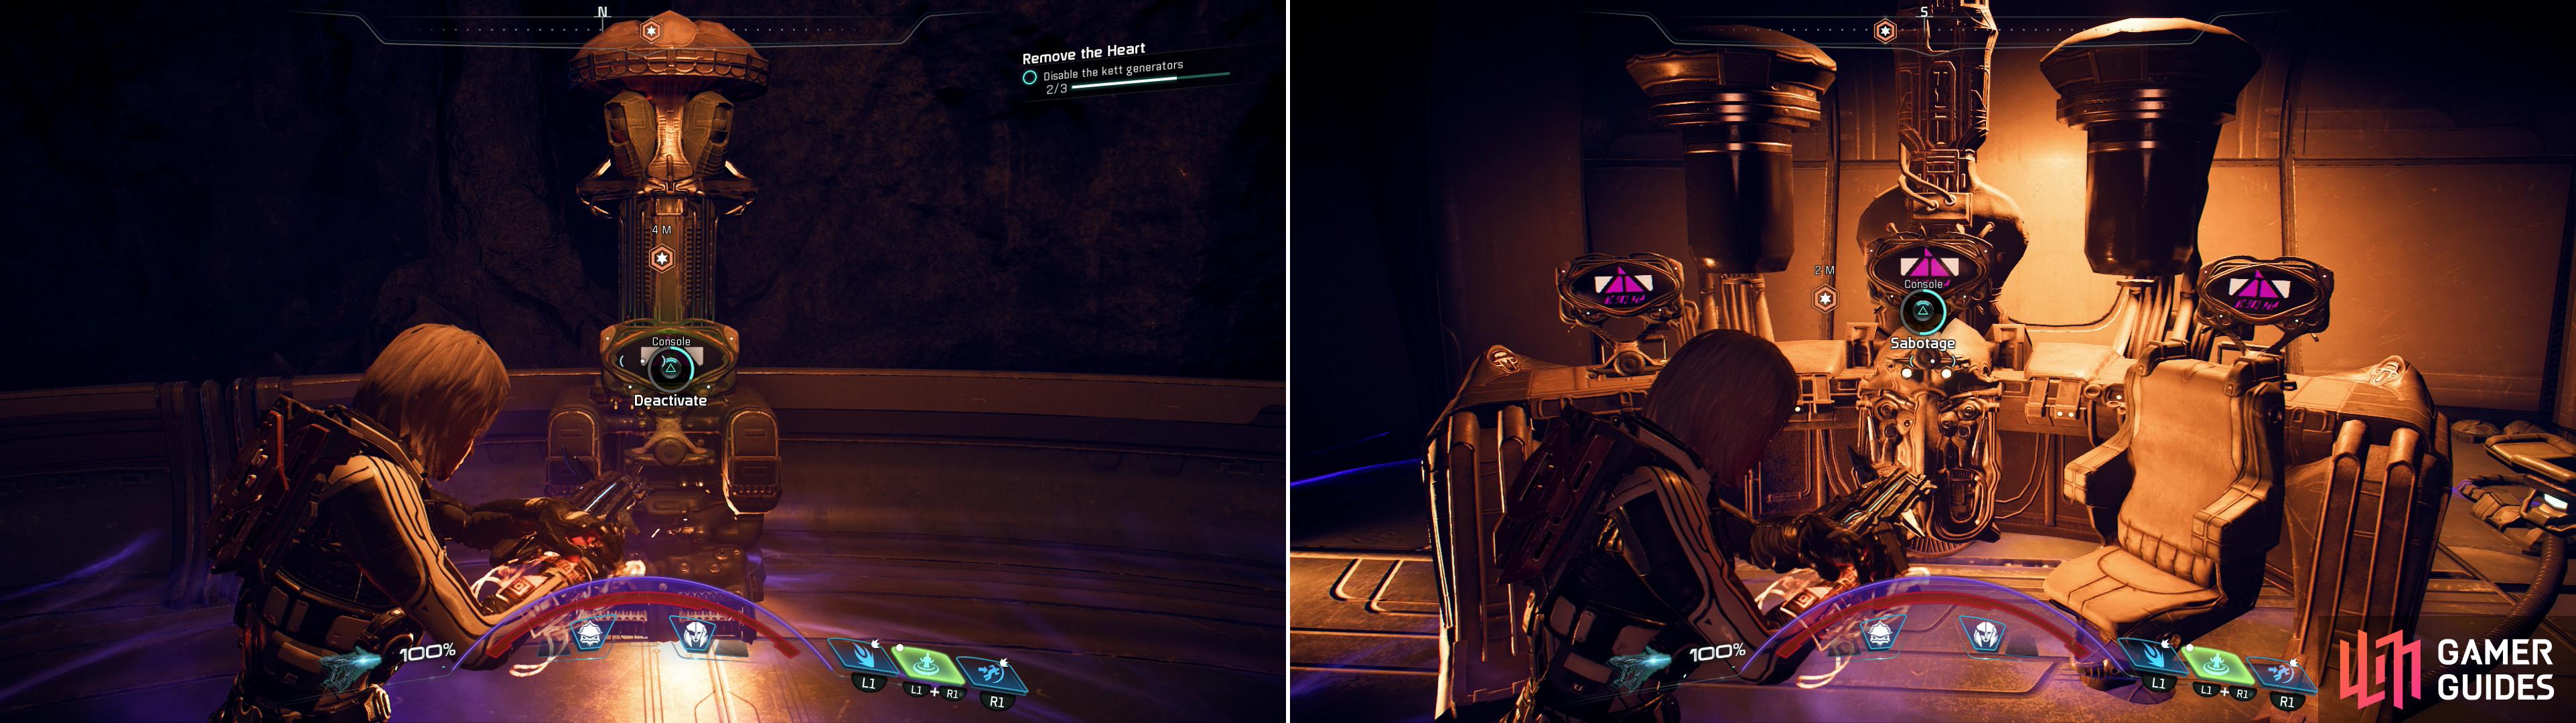 Survive waves of Kett to reach three Kett generators (left) after which you can disable the base's security and open the way to the core (right).